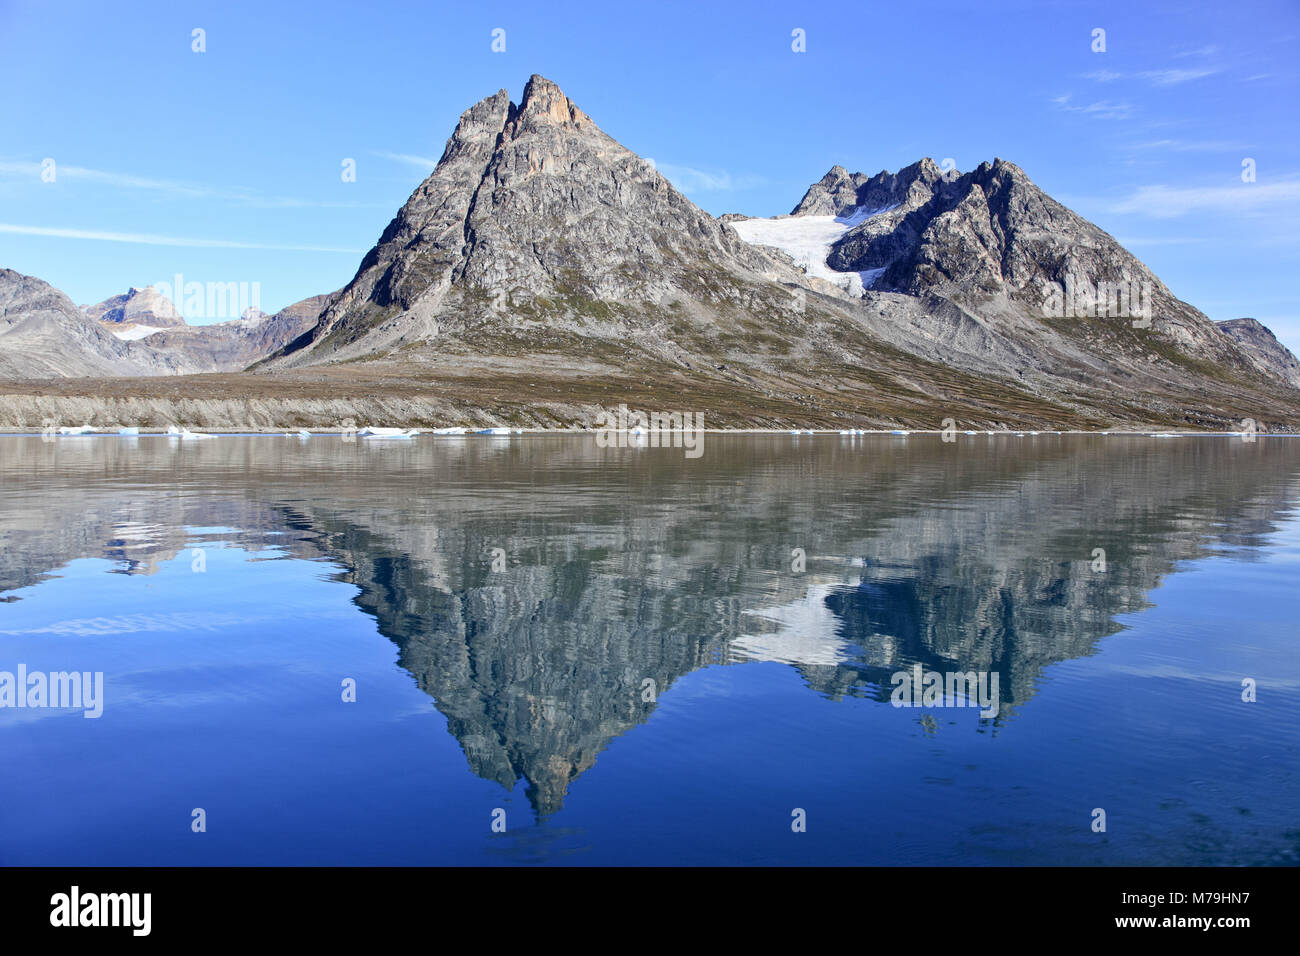 Greenland, East Greenland, coastal scenery, mountains, water reflection, Stock Photo